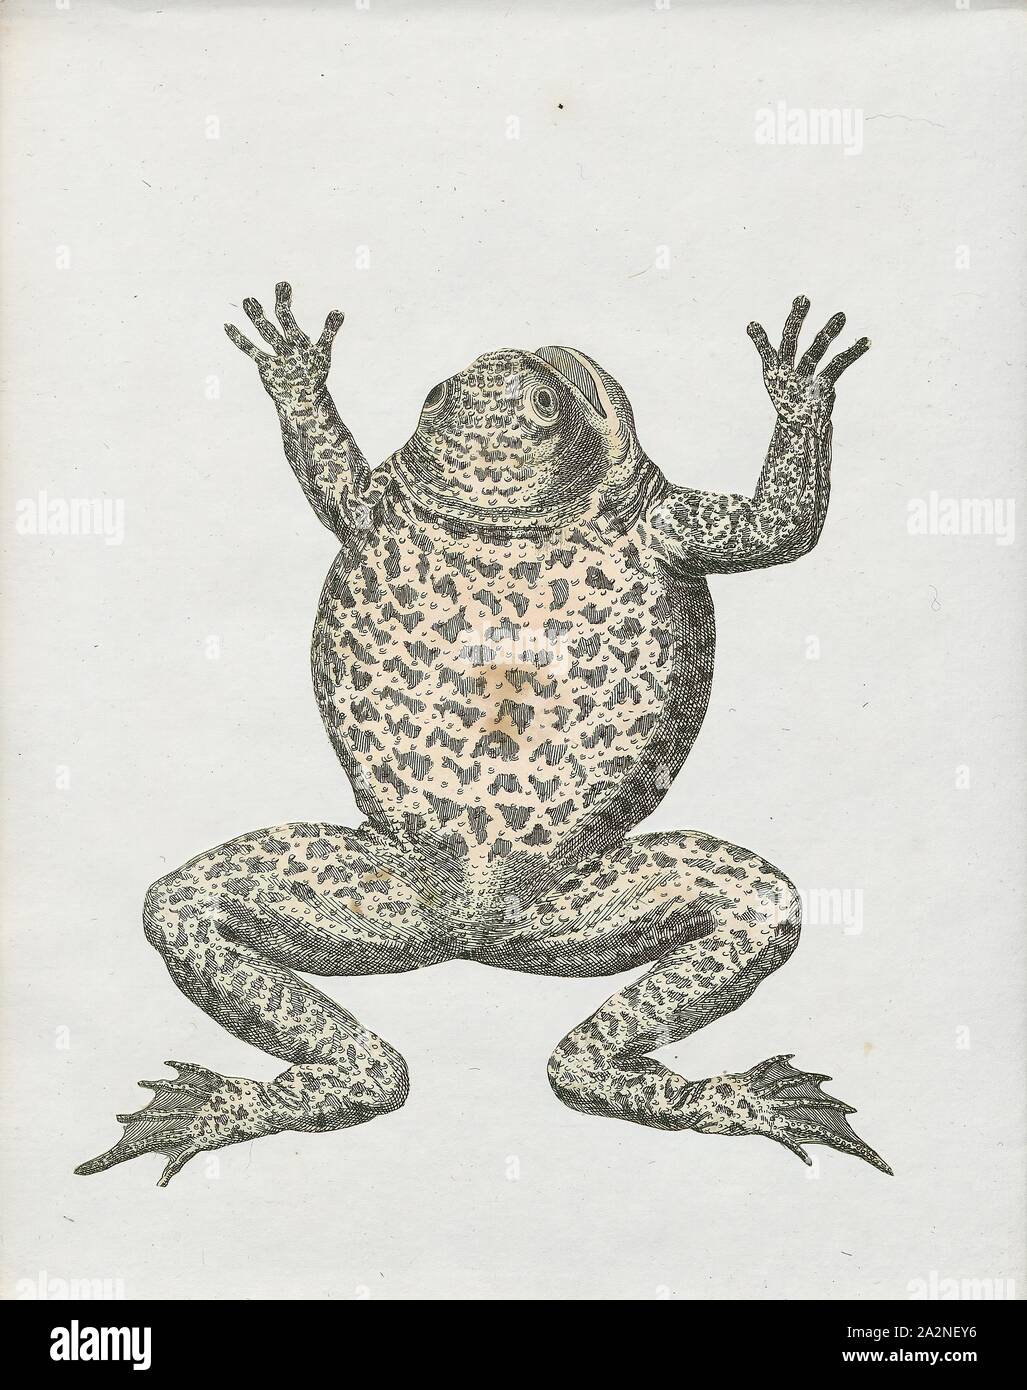 Rana maculosa, Print, Nanorana arnoldi (common name: Arnold's paa frog) is a species of frog in the Dicroglossidae family. It is found in southwestern China (Tibet, Yunnan), northern Myanmar, eastern Nepal, and adjacent northeastern India. Its natural habitats are subtropical or tropical moist montane forests, rivers, and freshwater springs., 1700-1880 Stock Photo